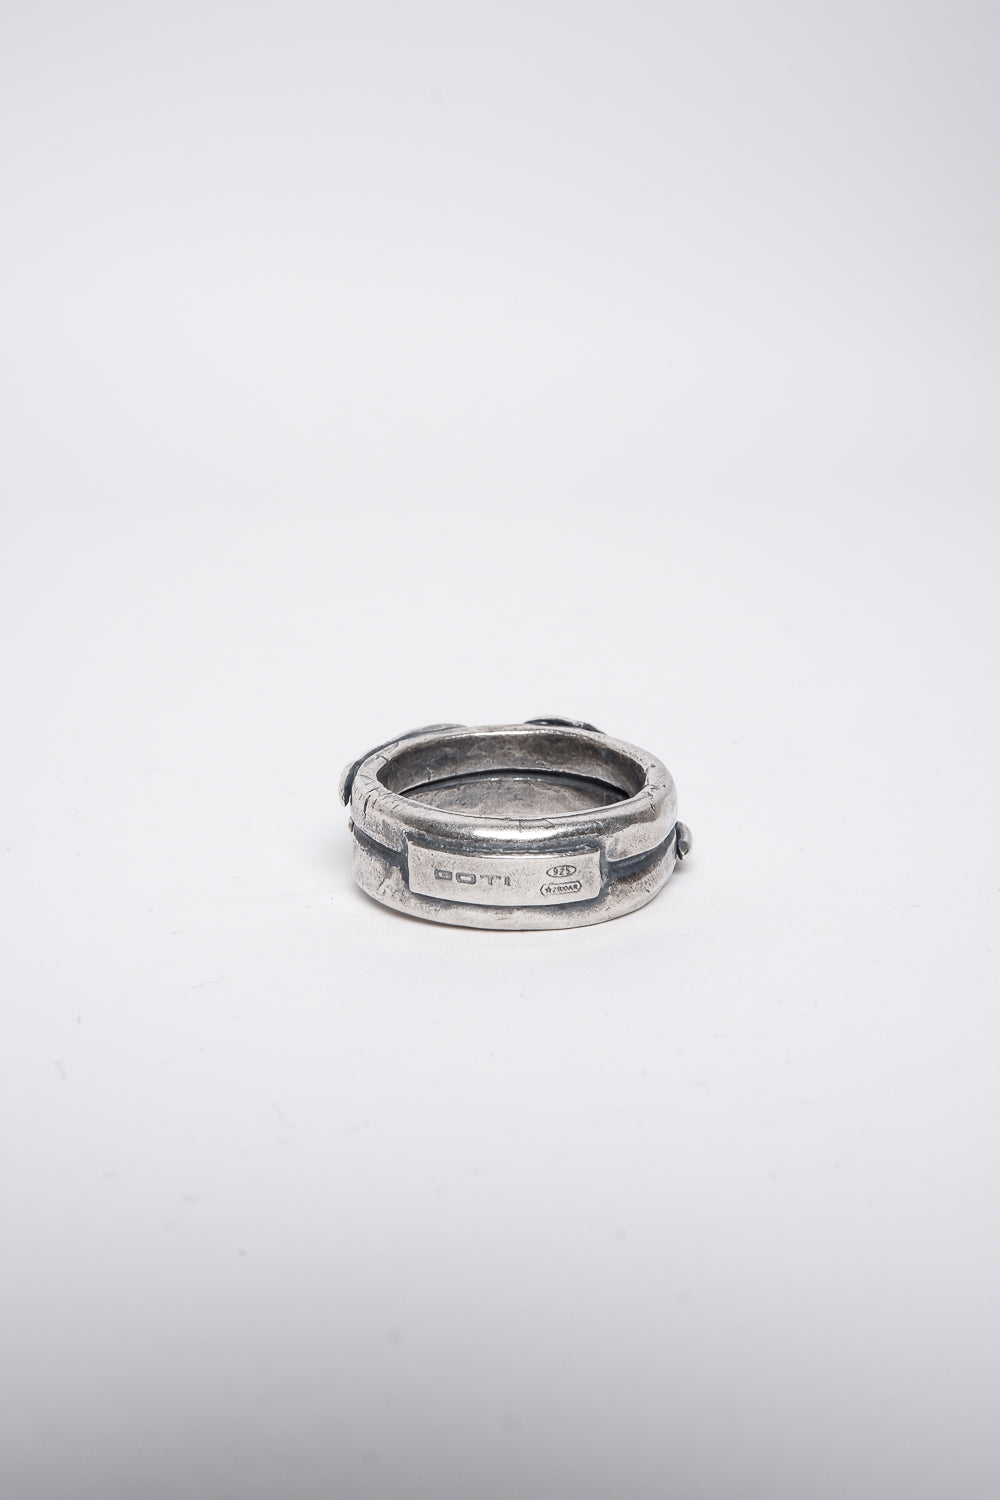 Buy the GOTI AN1056 Ring at Intro. Spend £50 for free UK delivery. Official stockists. We ship worldwide.